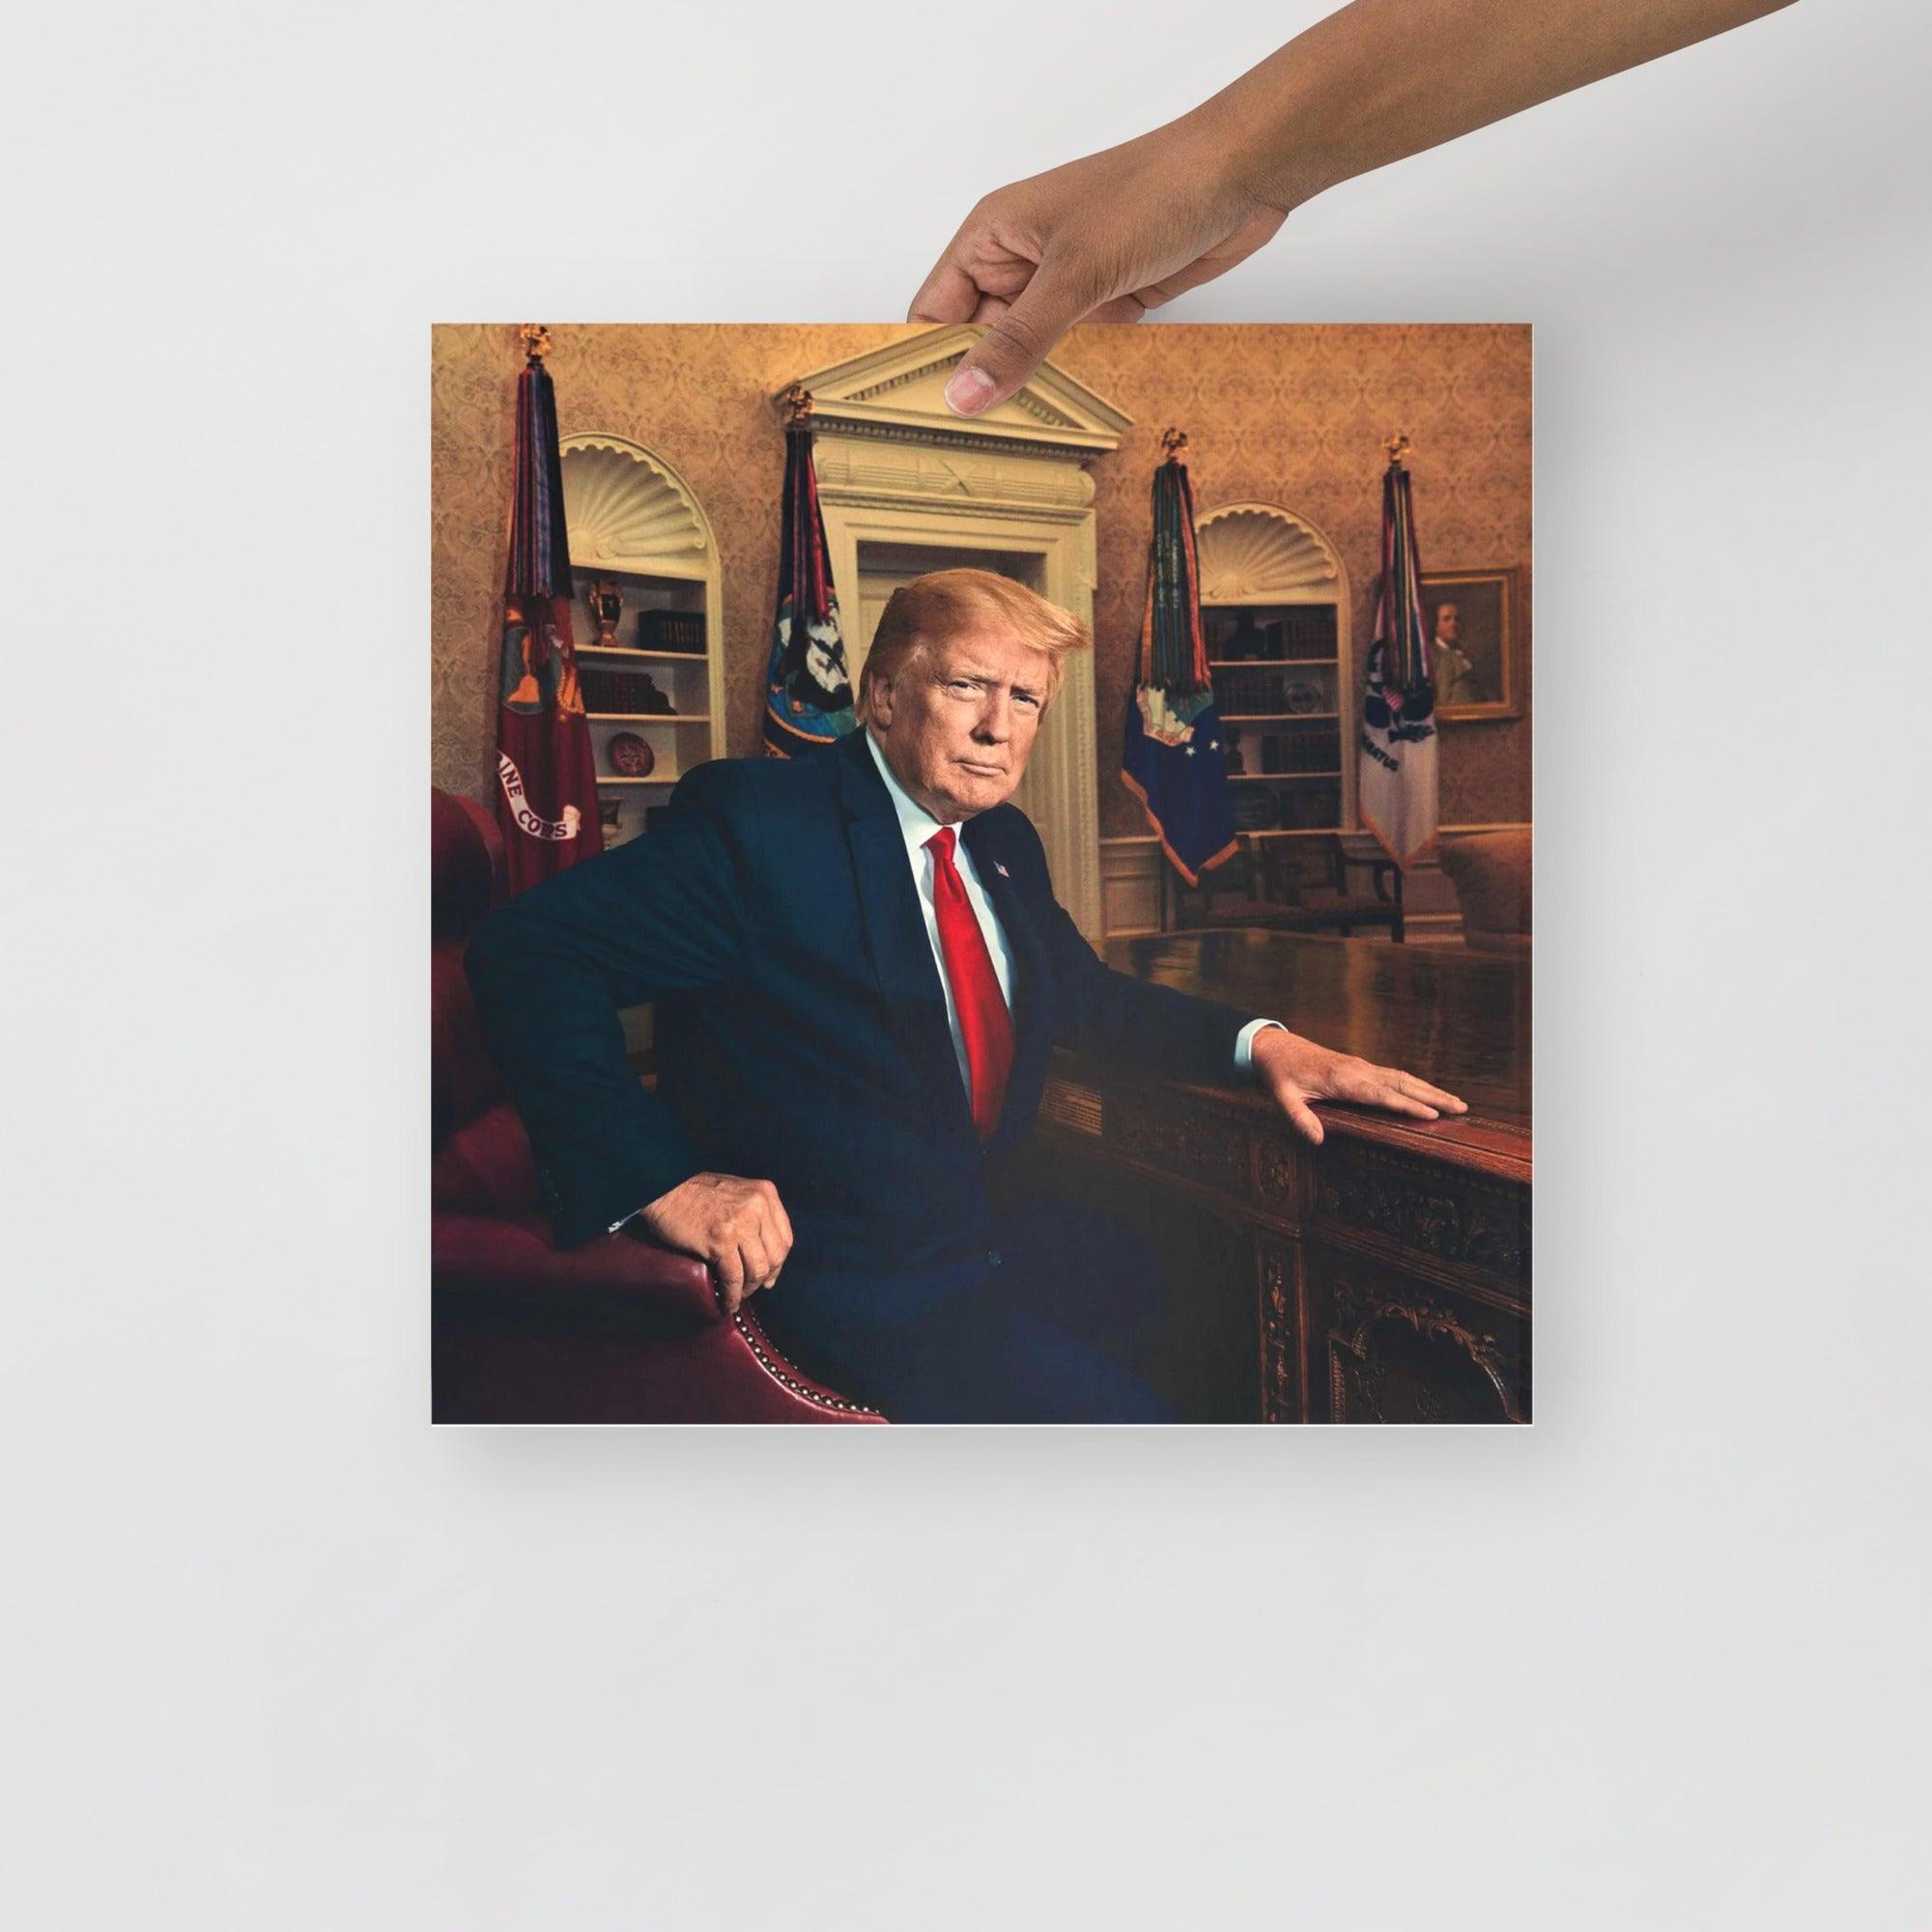 A Donald Trump at the Oval Office poster on a plain backdrop in size 16x16”.